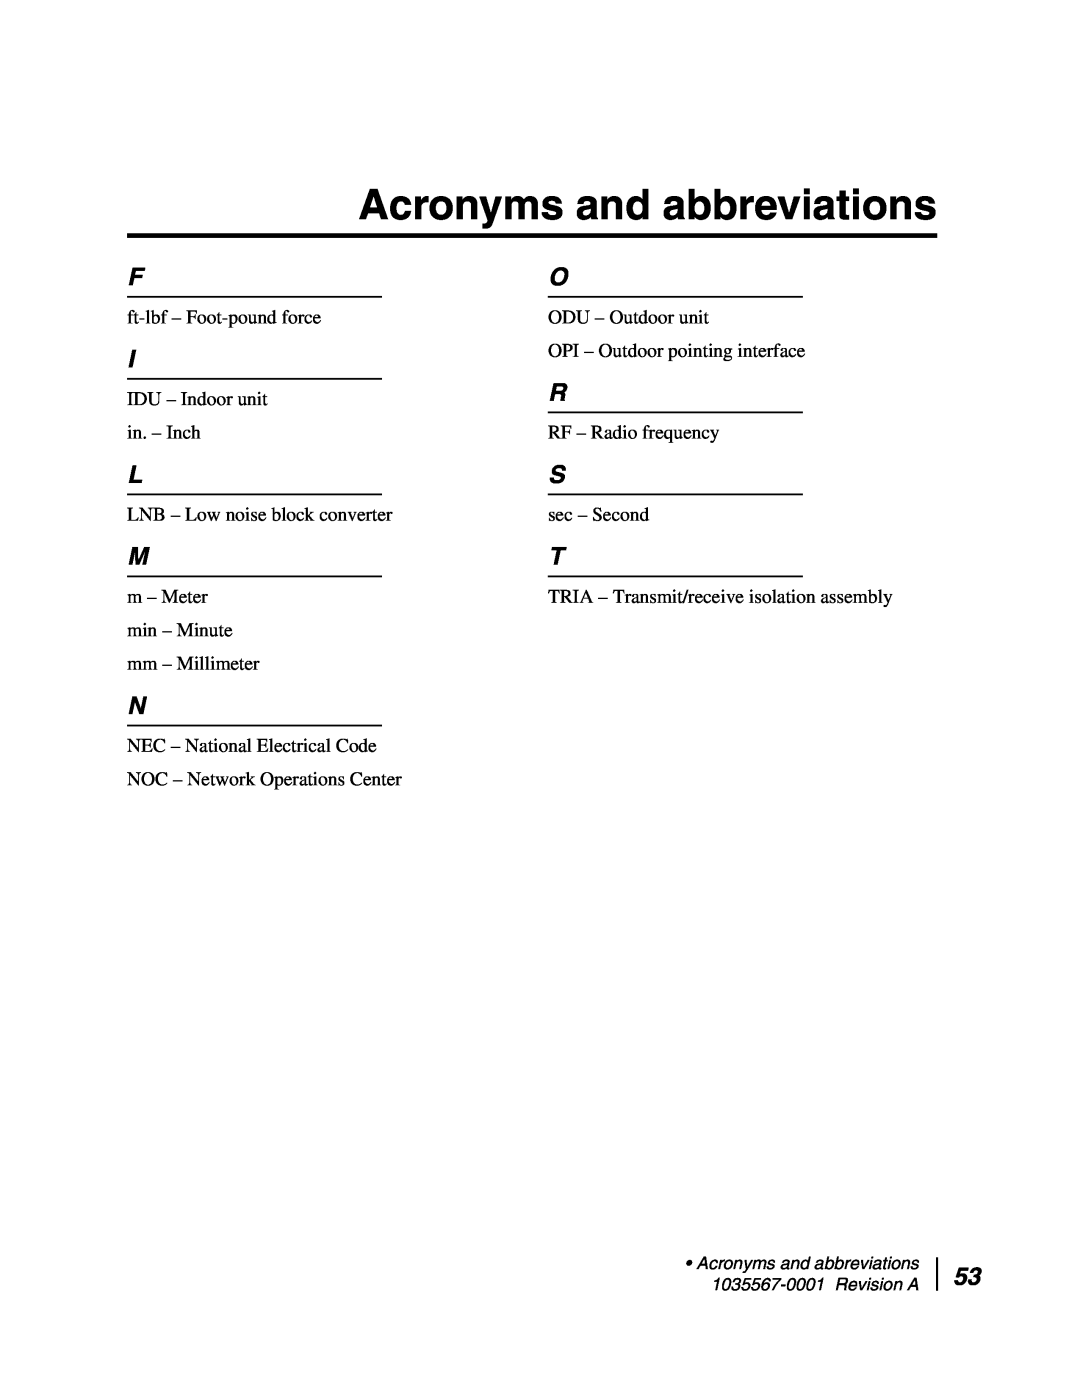 Hughes AN4-074-DF installation manual Acronyms and abbreviations 